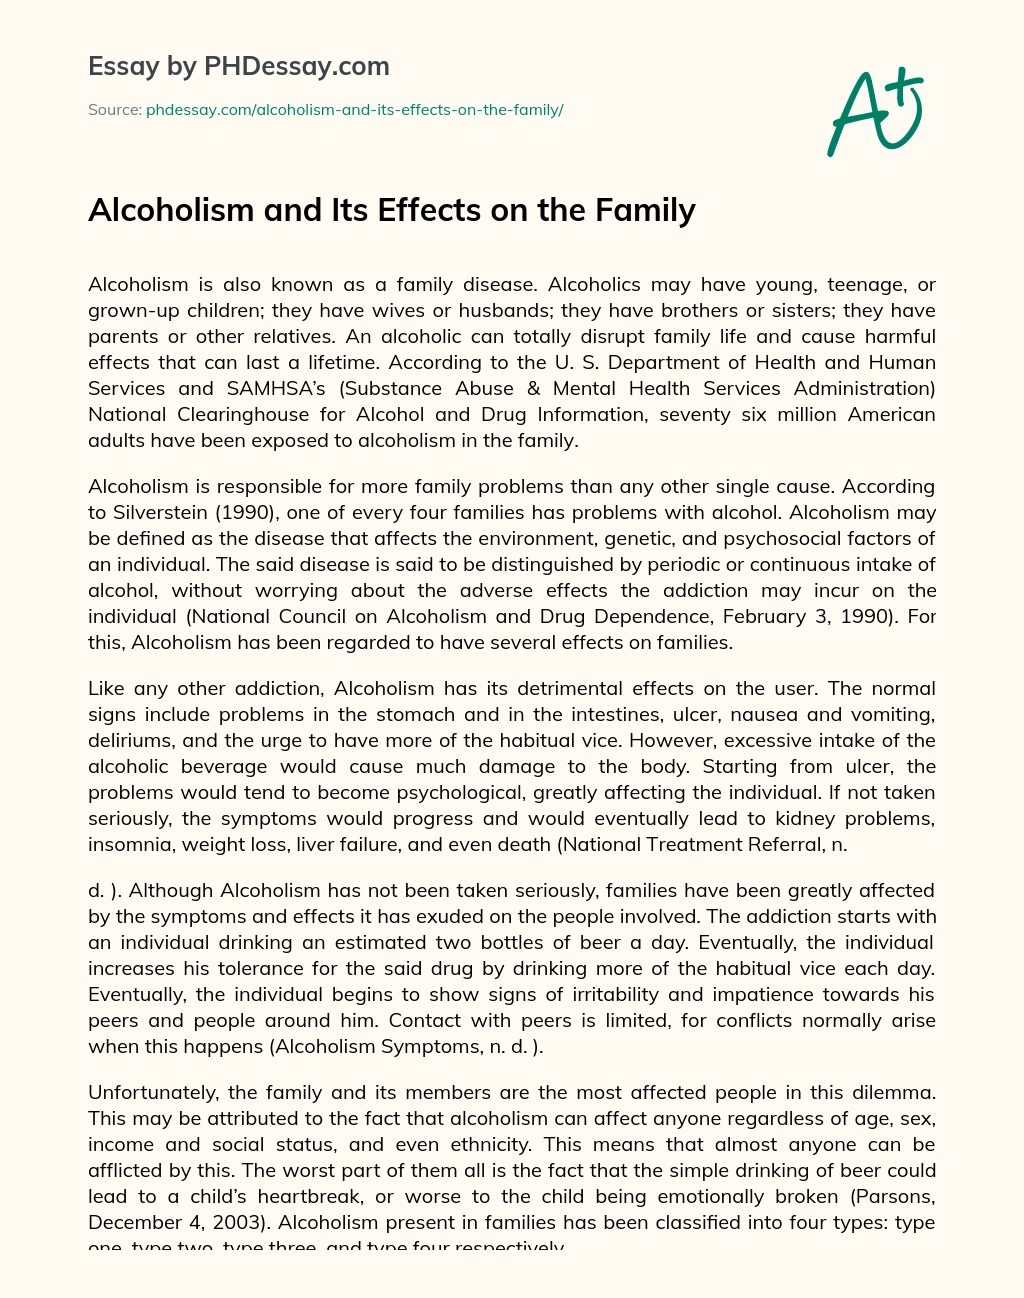 Alcoholism and Its Effects on the Family essay